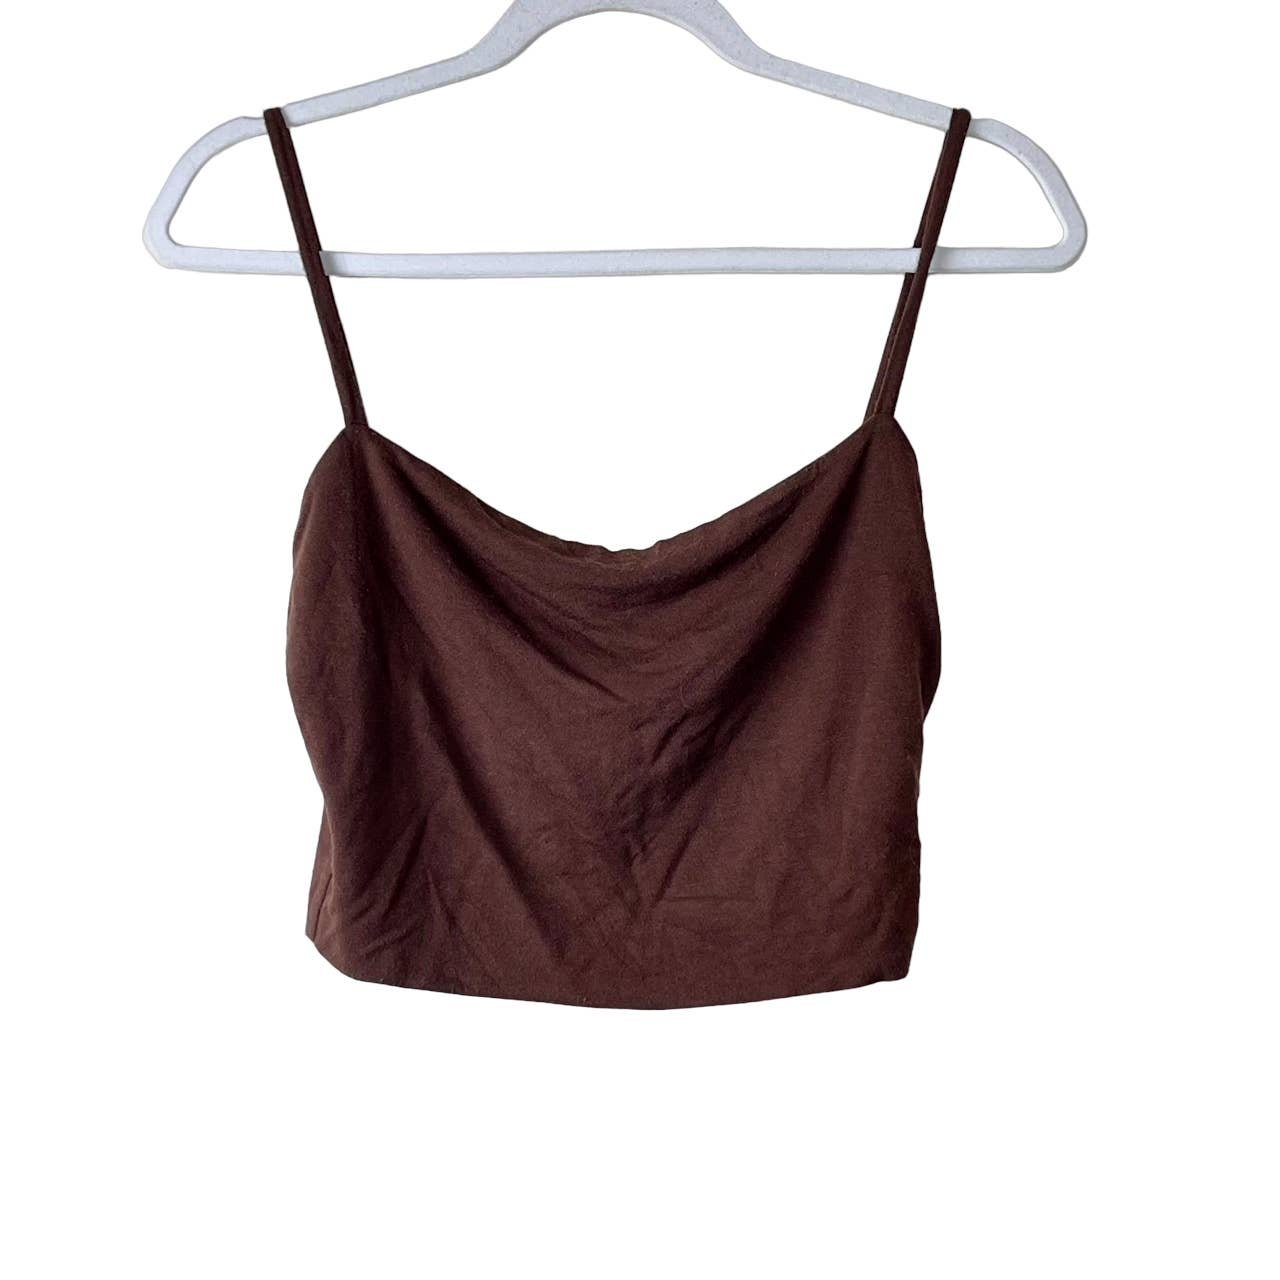 Naked Wardrobe Brown Thin Strap Extra Sultry Crop Top S